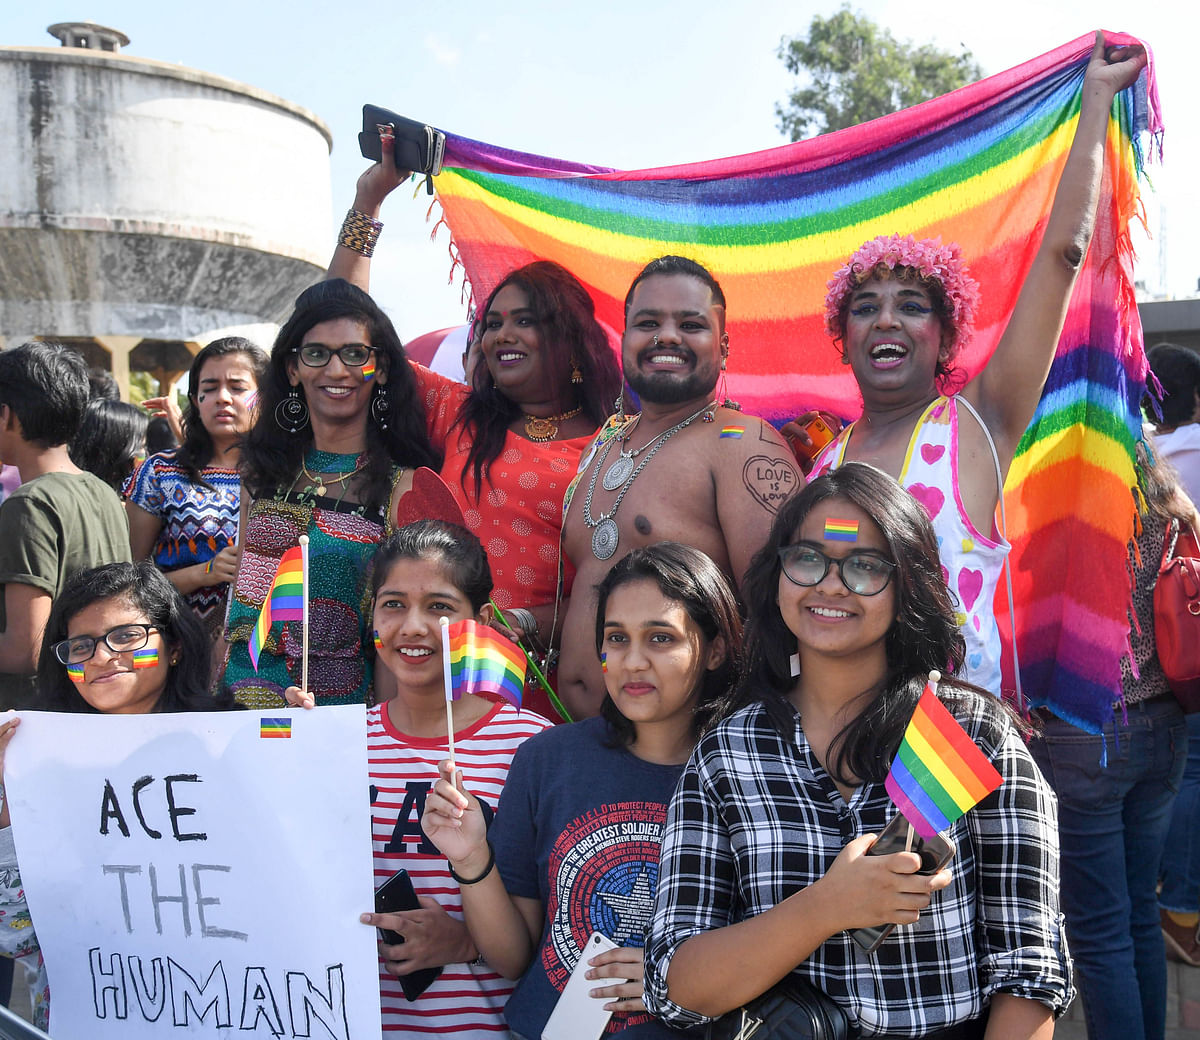 Pride events face new odds